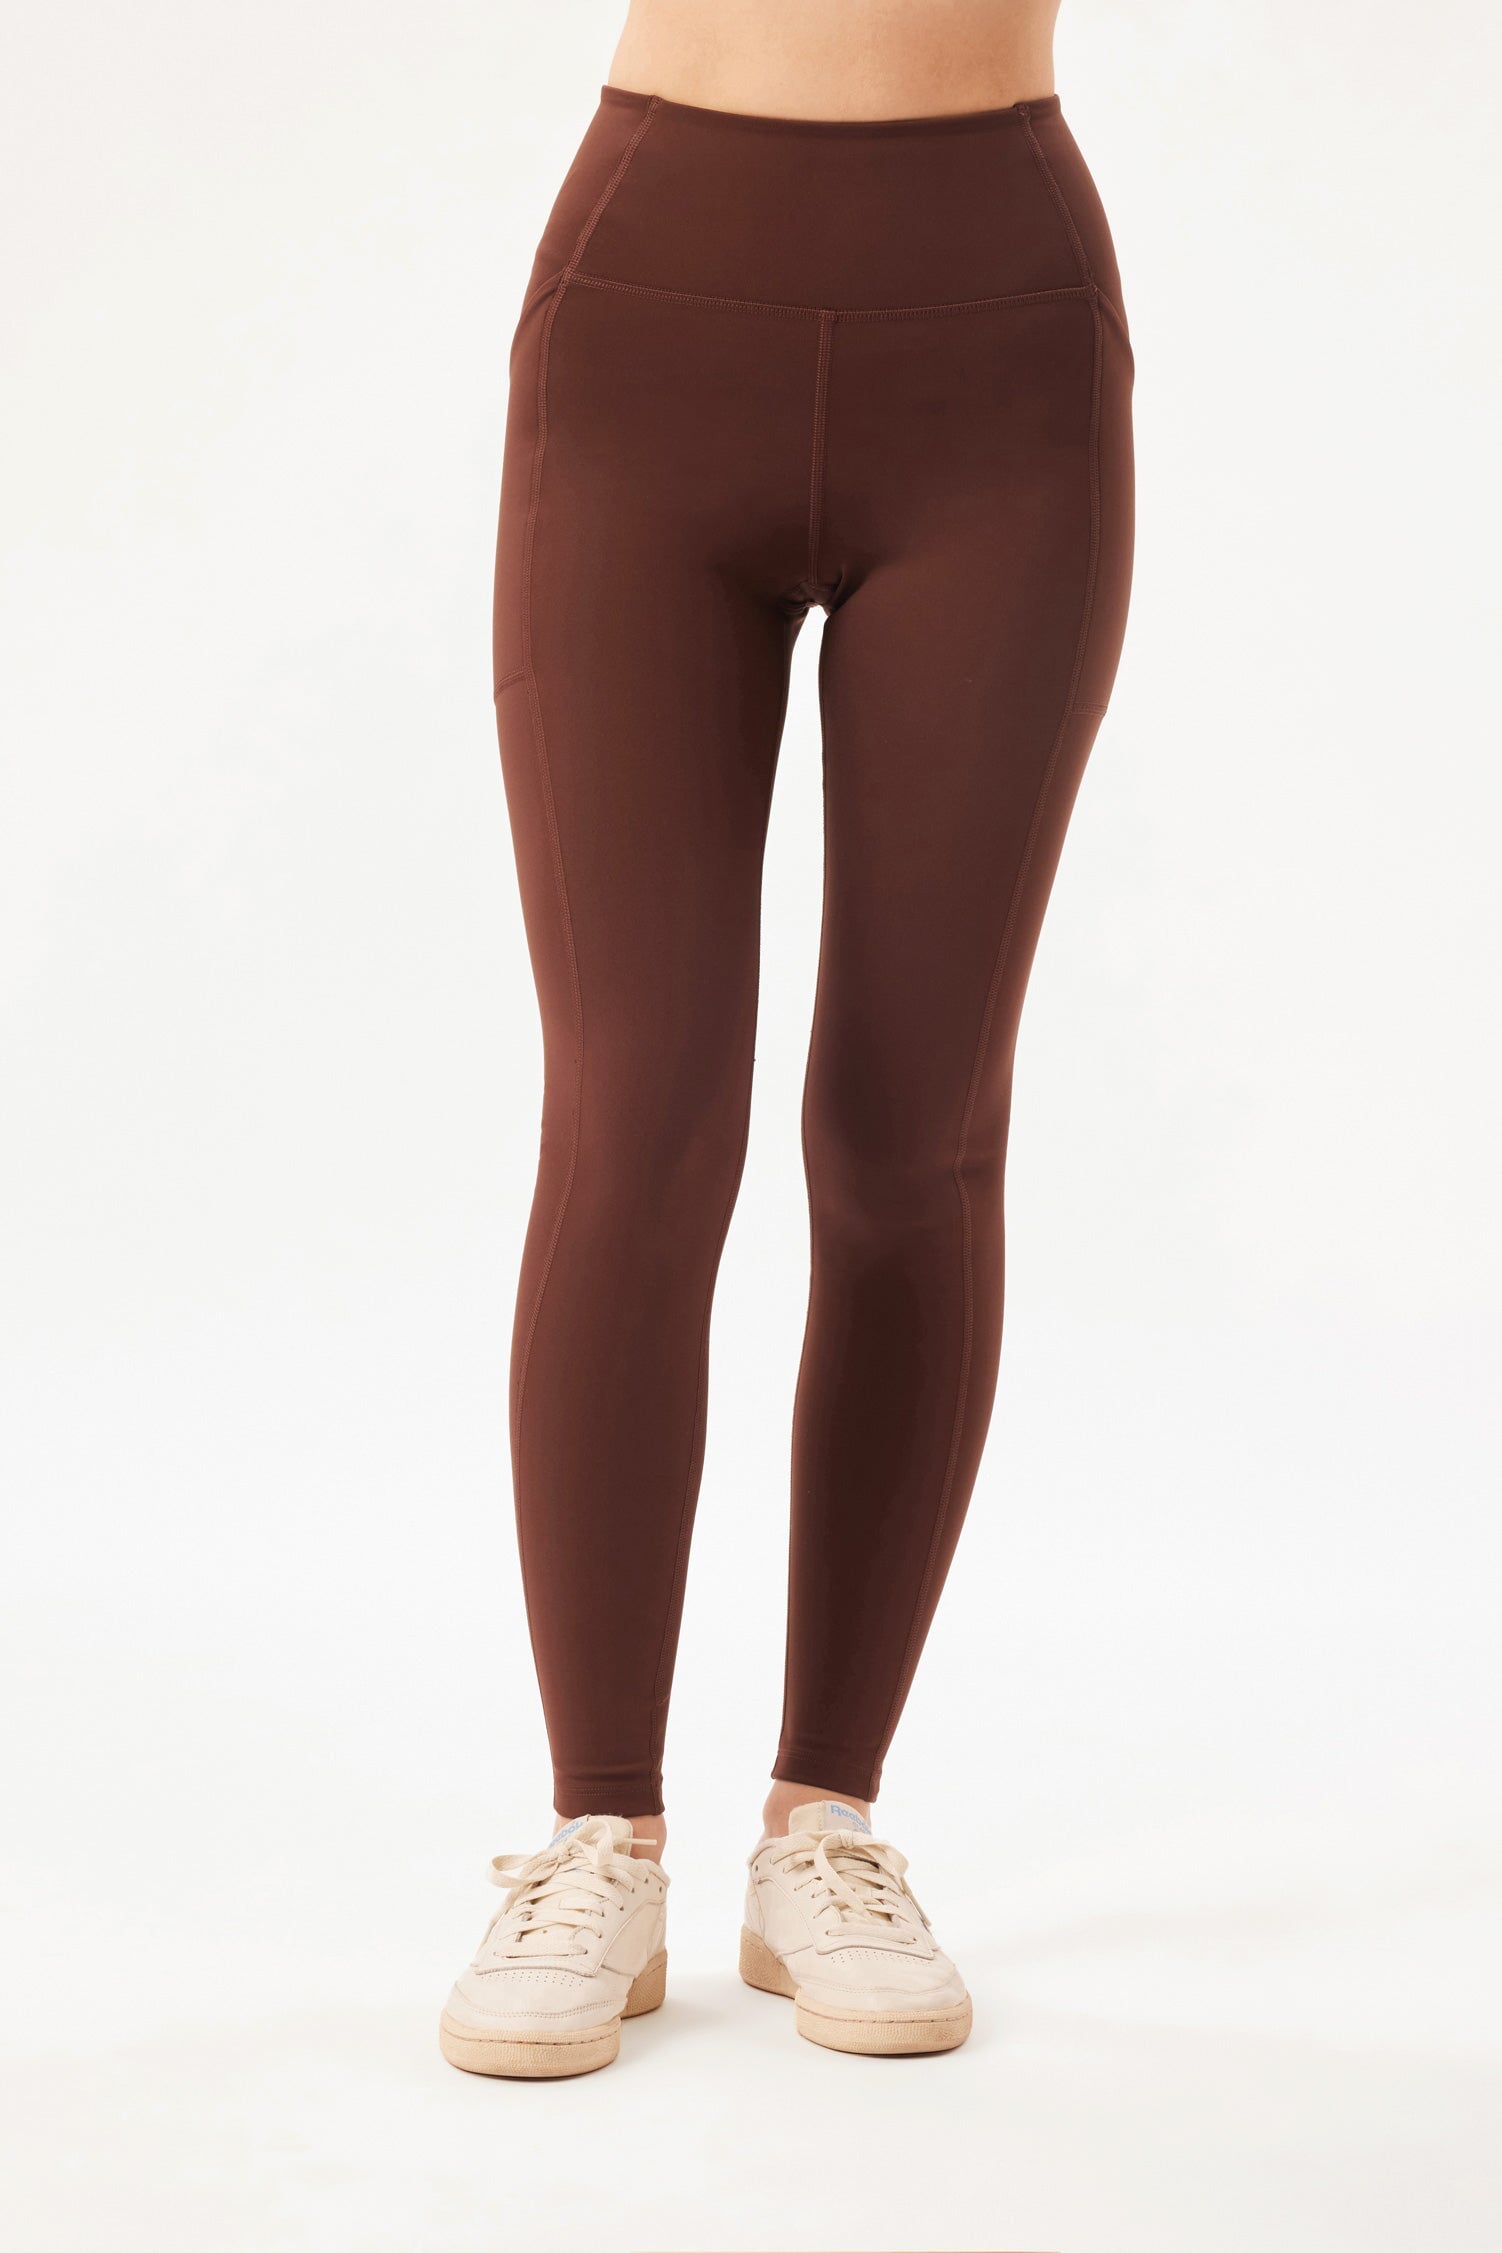 Girlfriend Collective Pocket Leggings High Rise Long in Moon – Ohh! By Gum